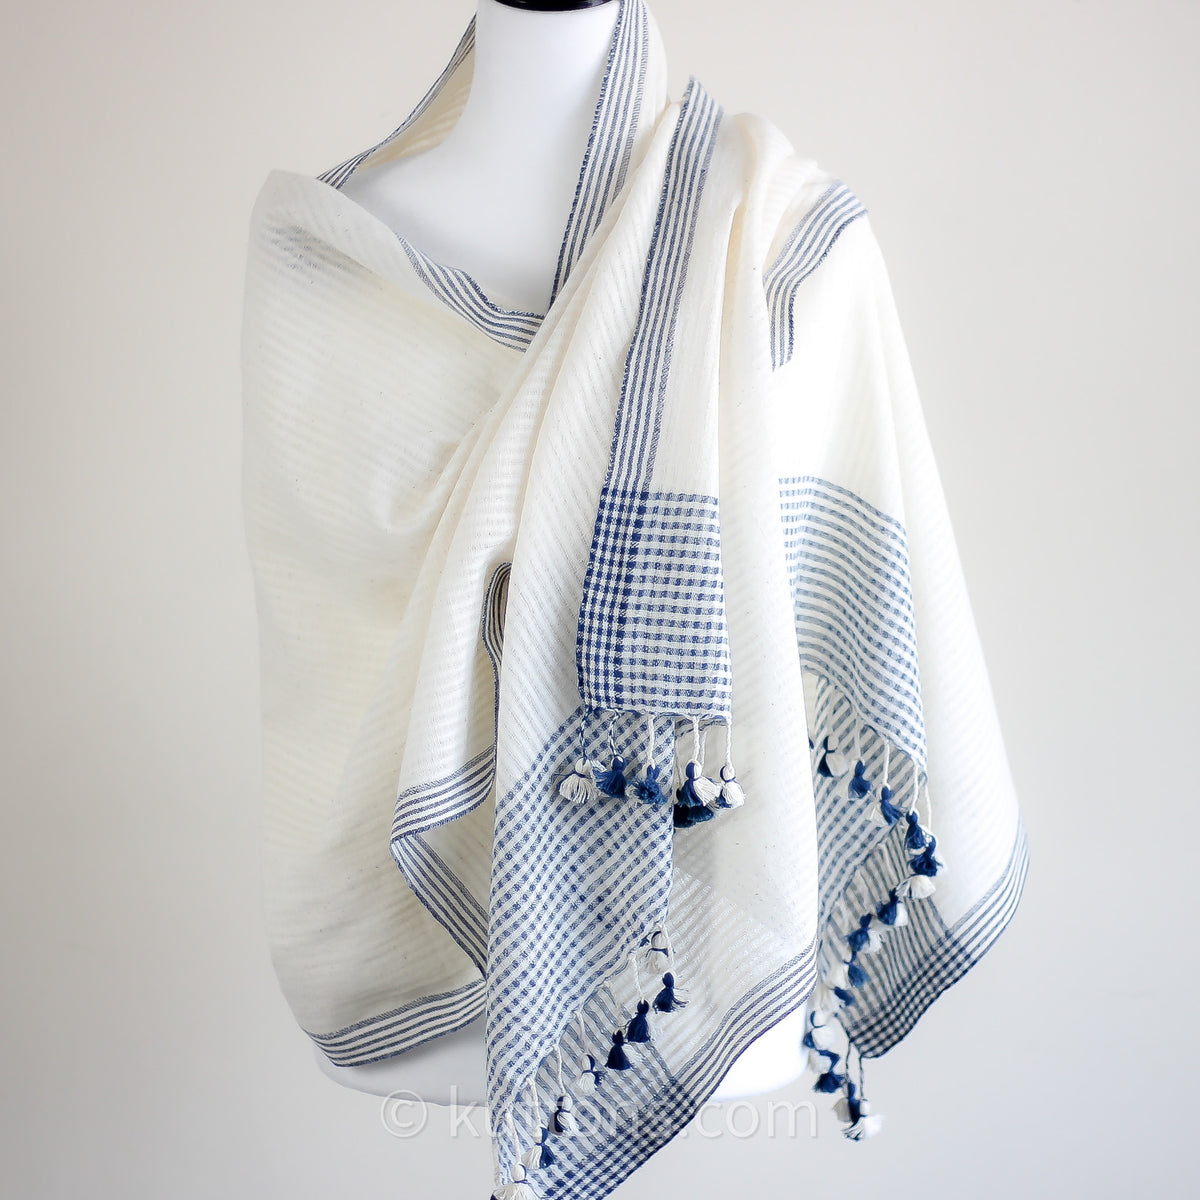 Organic Cotton Wrap, Dyed with Natural Dyes - Handspun & Handwoven by Women Weavers | White-Blue, 25x82"